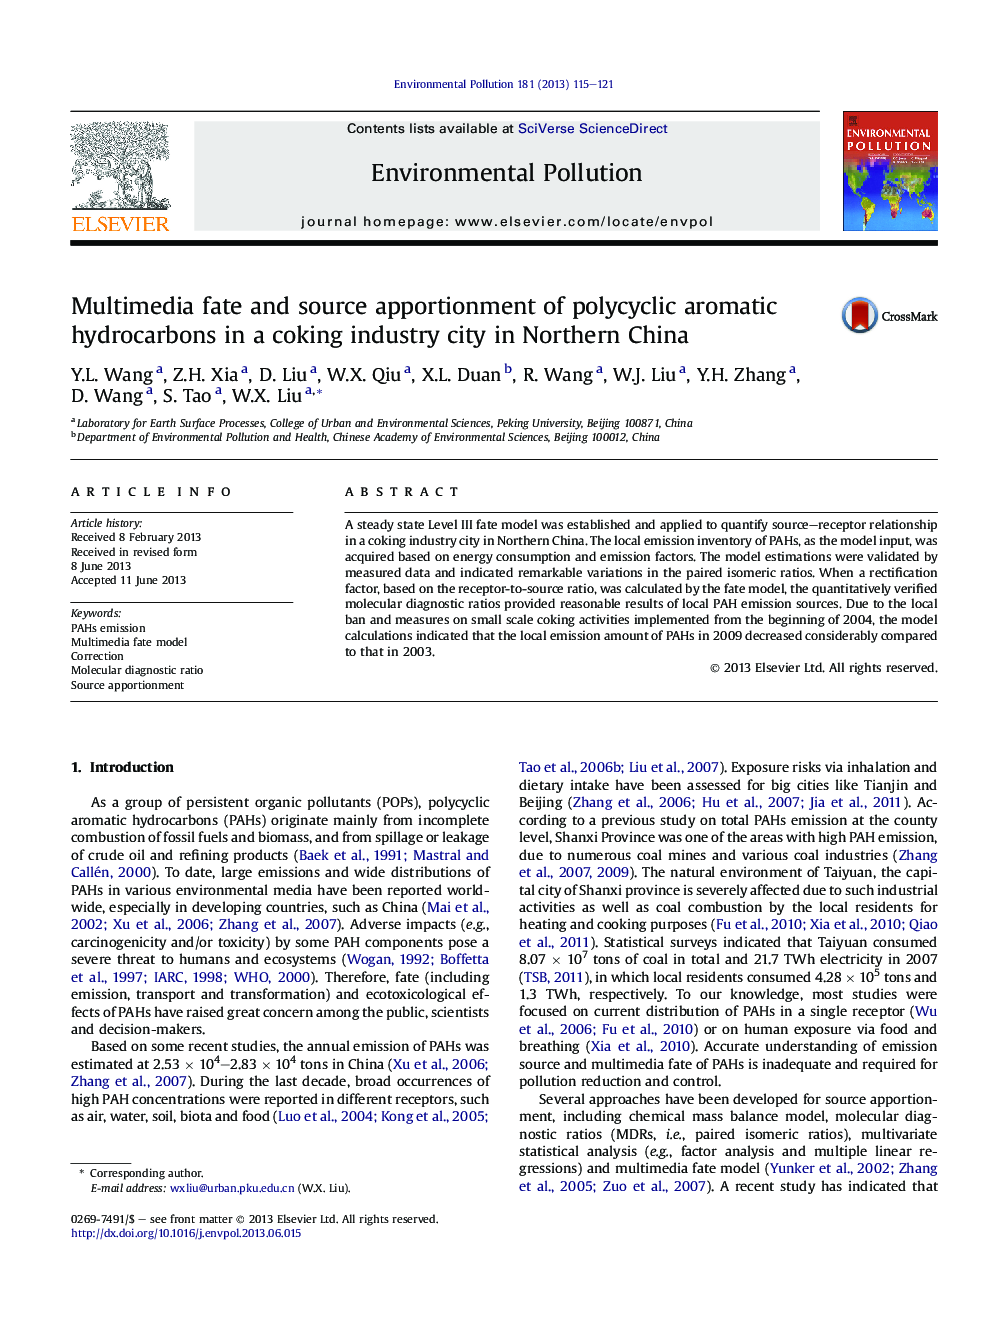 Multimedia fate and source apportionment of polycyclic aromatic hydrocarbons in a coking industry city in Northern China